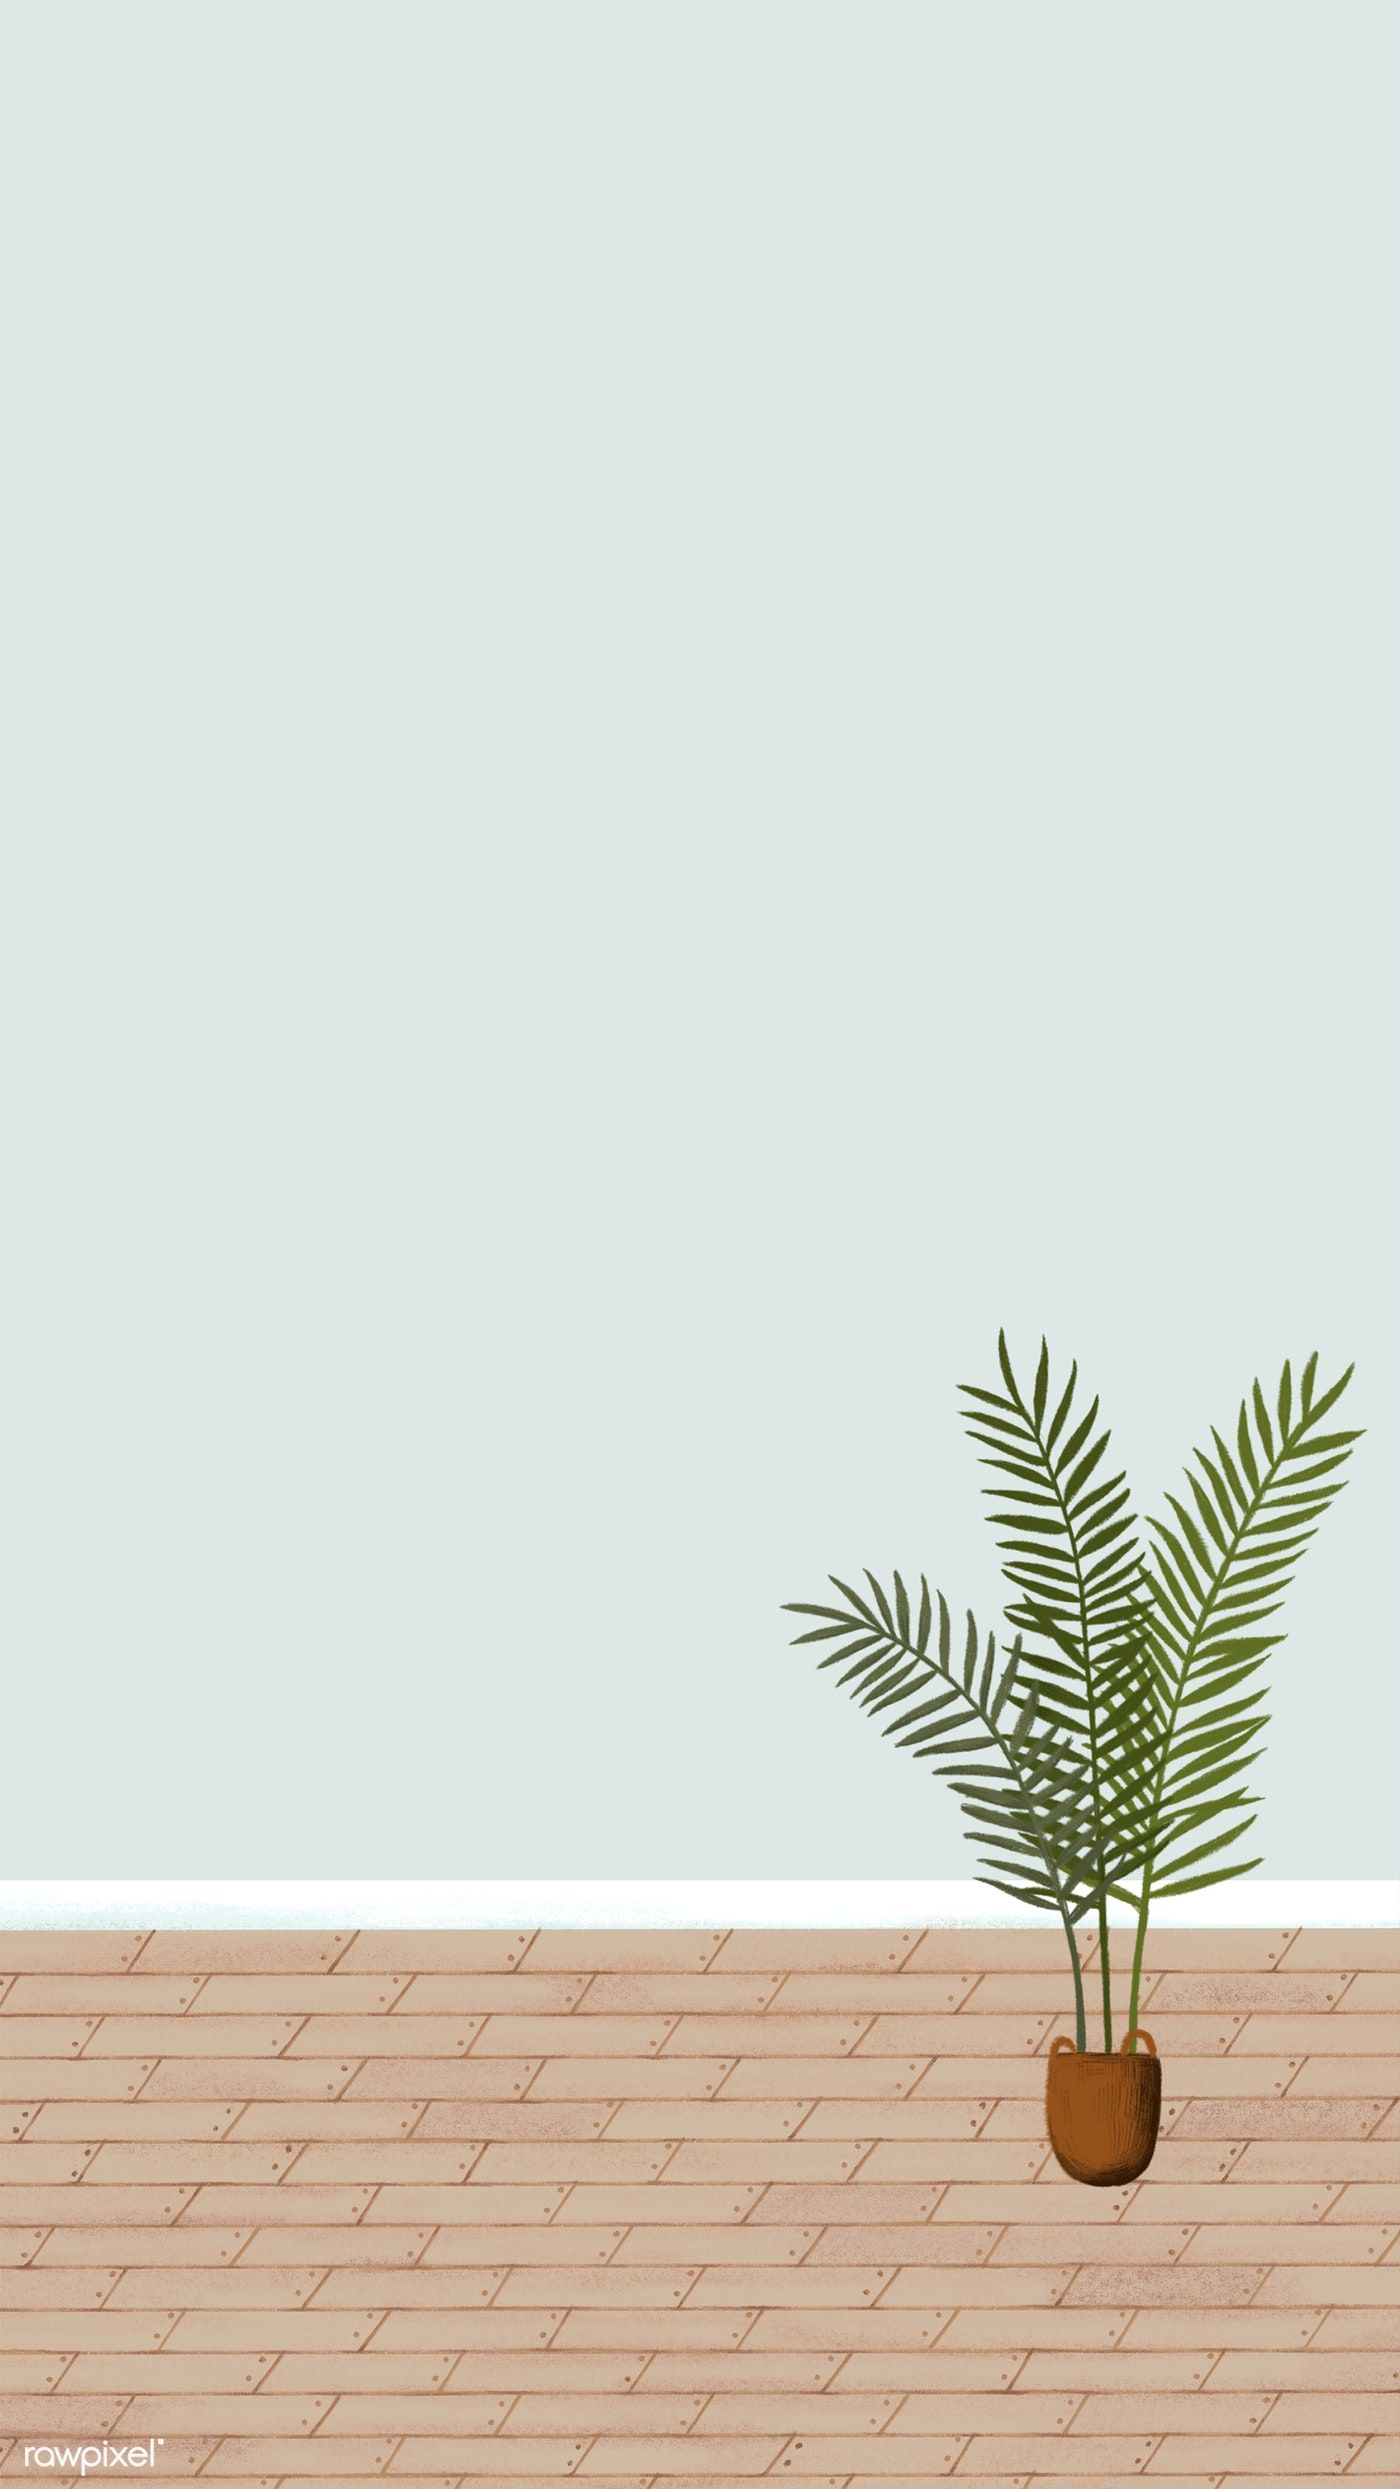 Download Premium Illustration Of Houseplant Sketch Style Mobile Phone